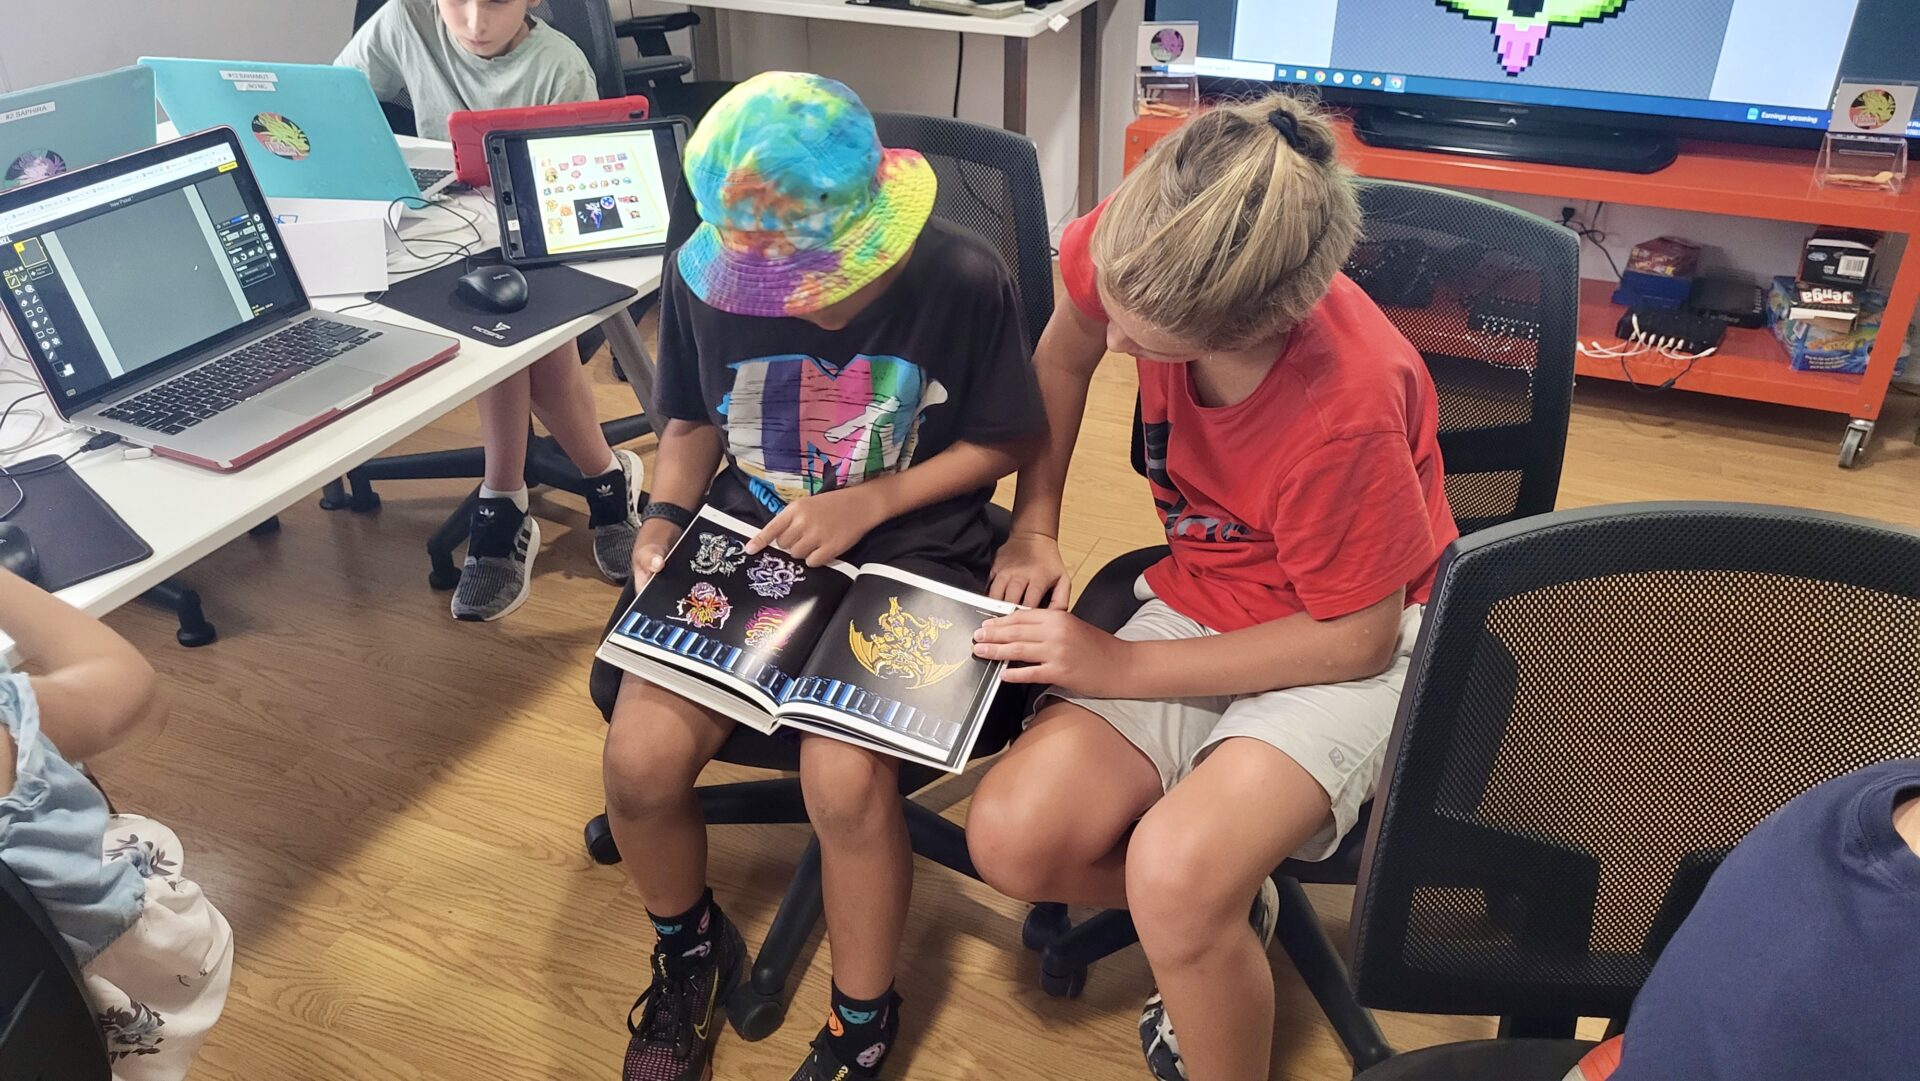 Students learning and communicating together in tech education.